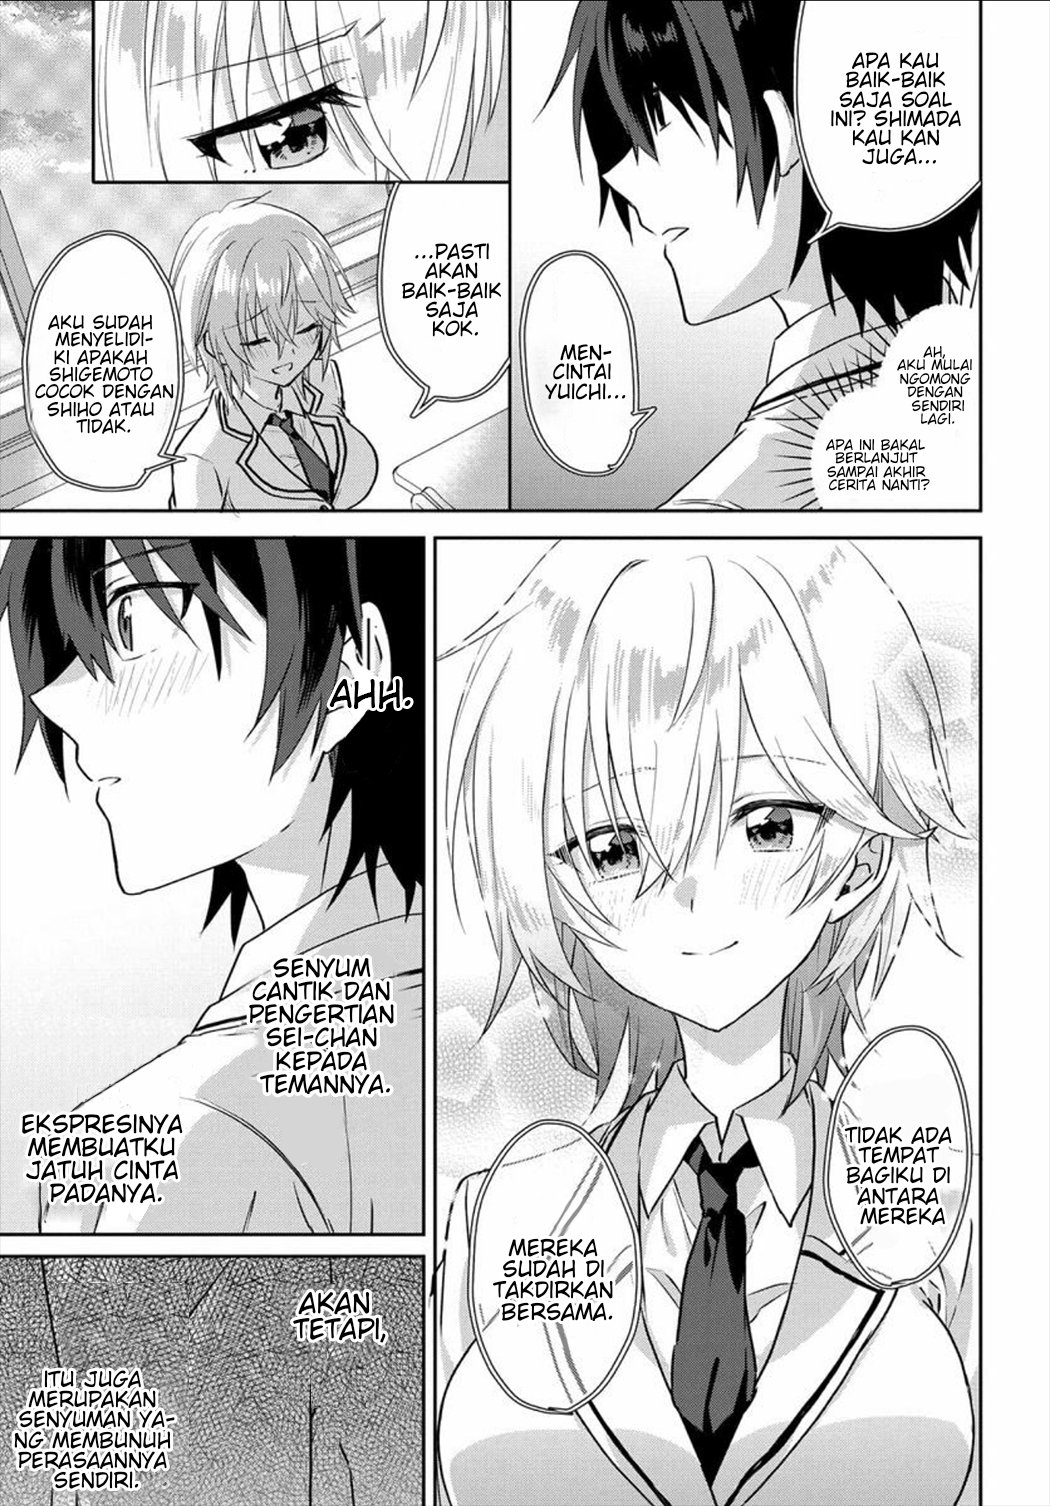 Since I'Ve Entered The World Of Romantic Comedy Manga, I'Ll Do My Best To Make The Losing Heroine Happy. Chapter 1 - 233